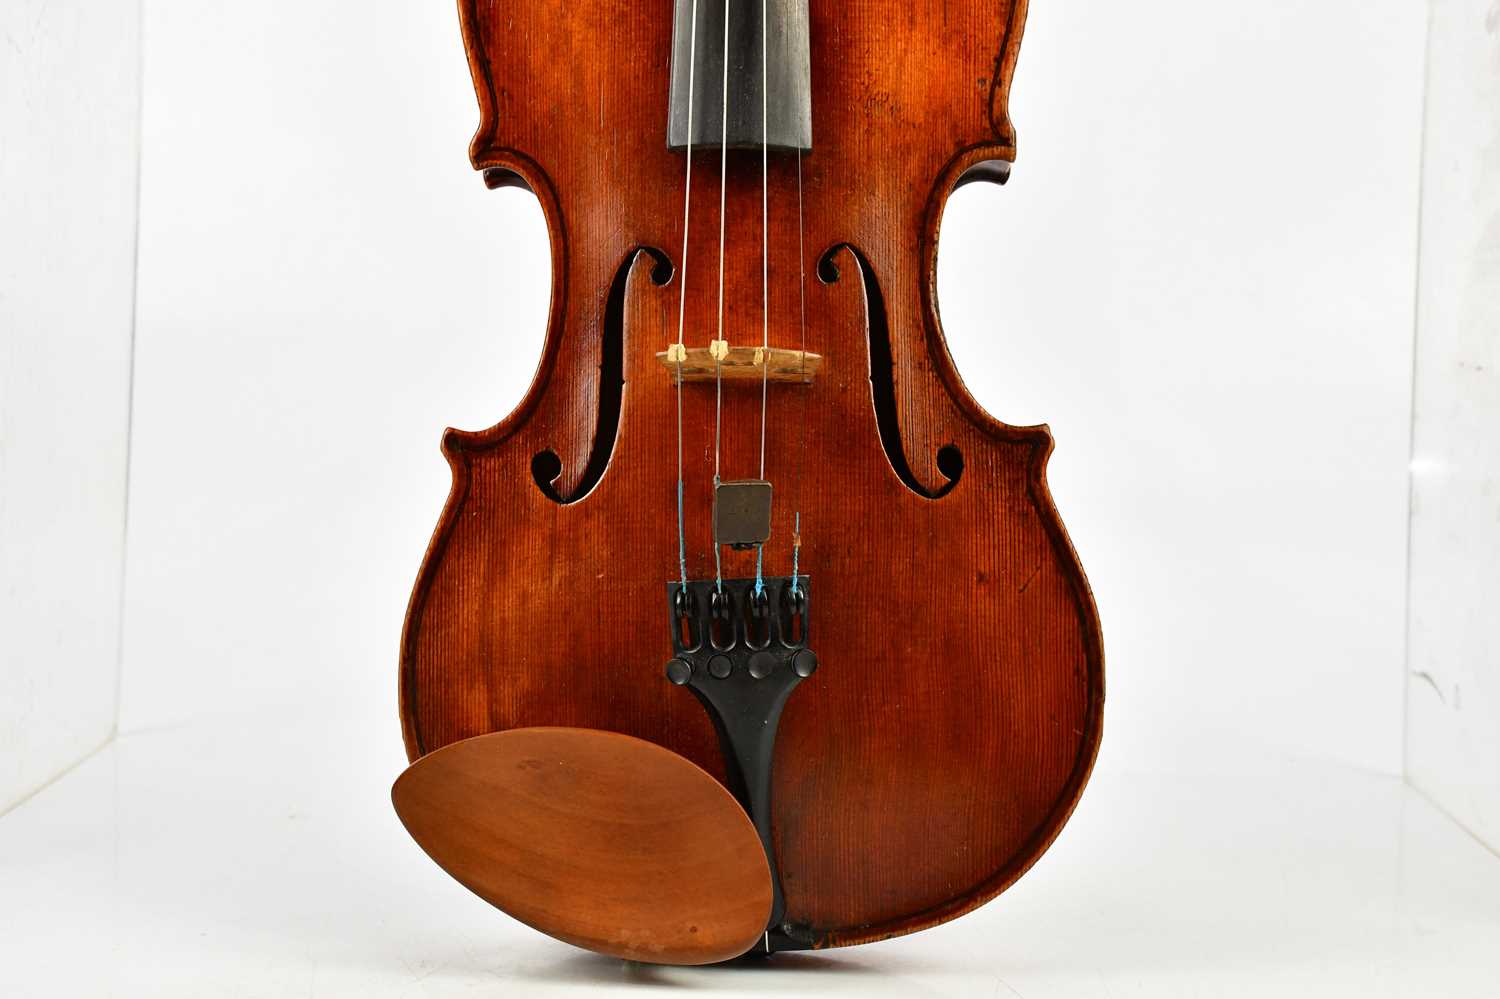 JAMES HARDIE & SONS; a full size Scottish violin with two-piece back and interior label 'Made by - Image 4 of 16